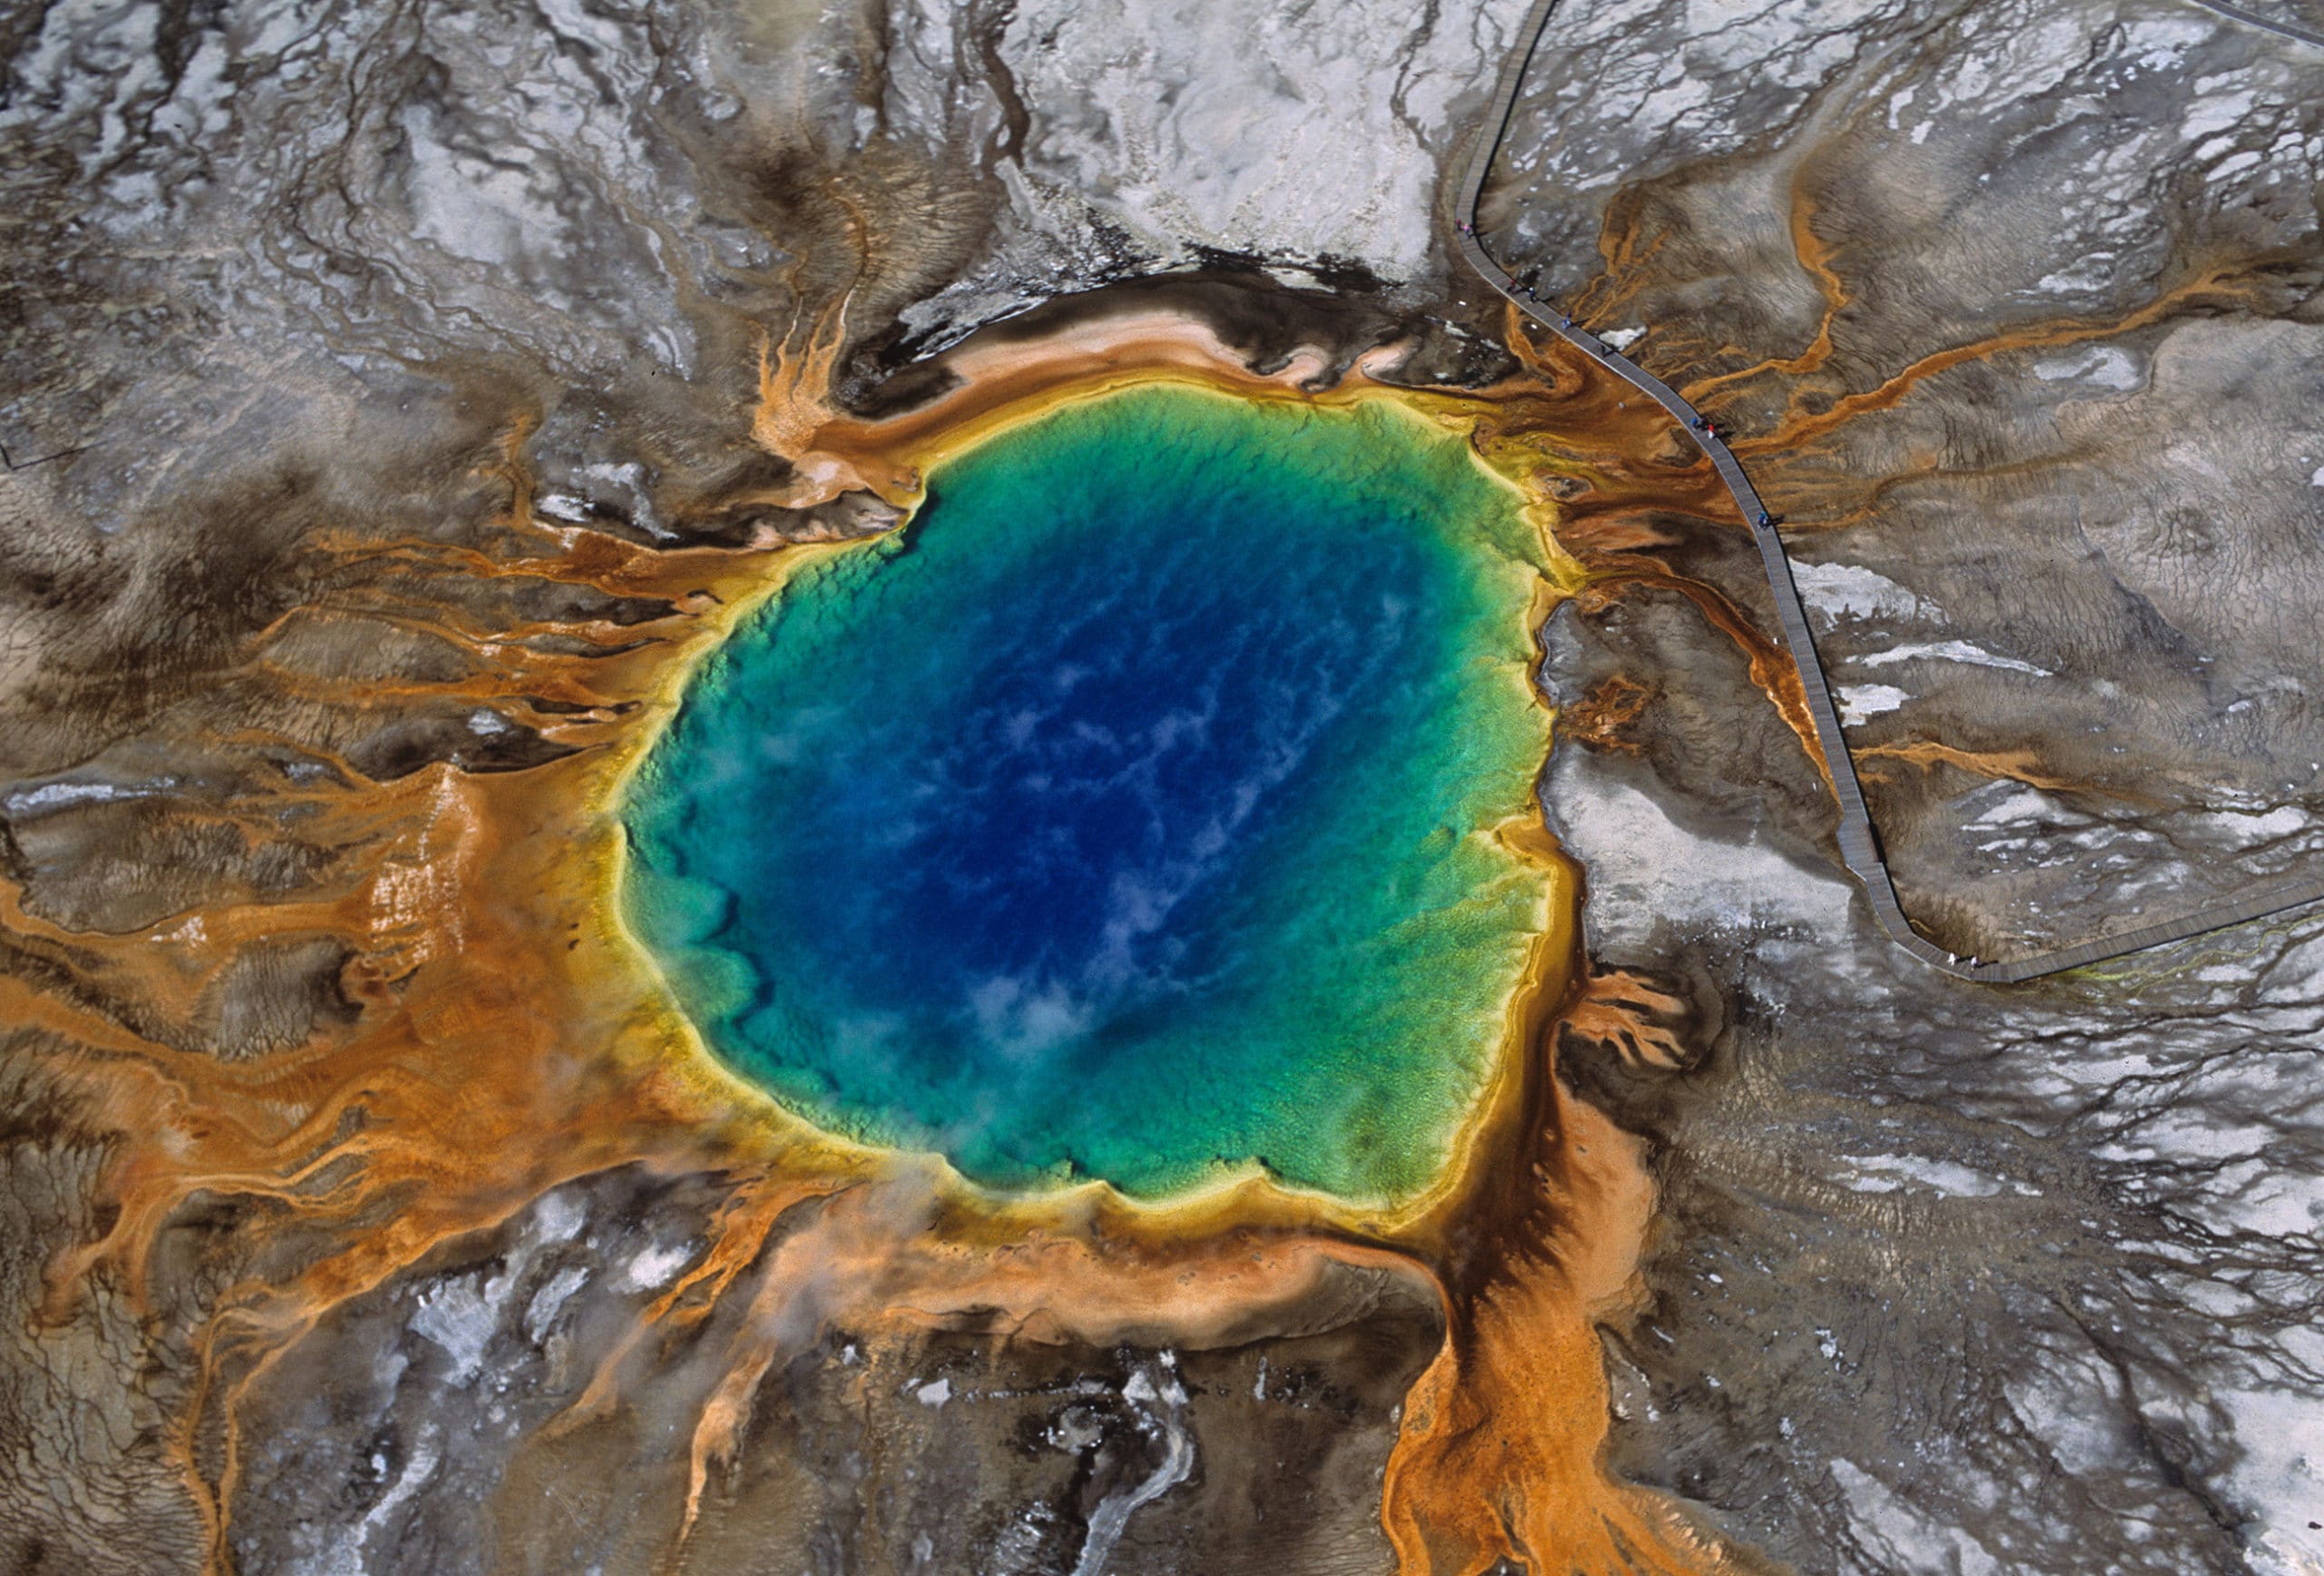 Wyoming's Yellowstone the first National Park - Joel Solkoff